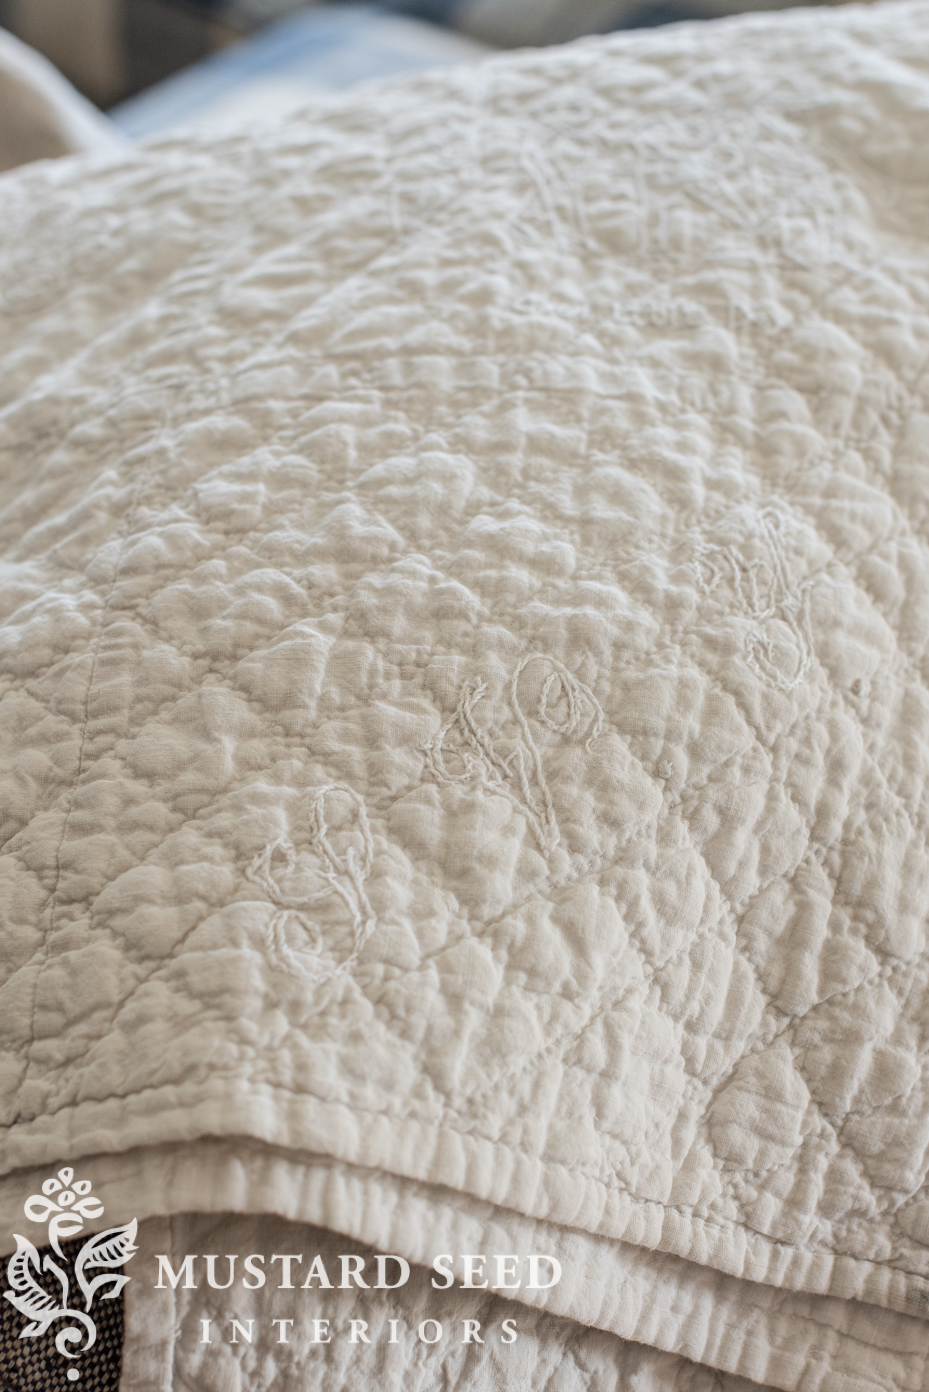 Antique white on white quilt | best supplies for cleaning antiques | miss mustard seed